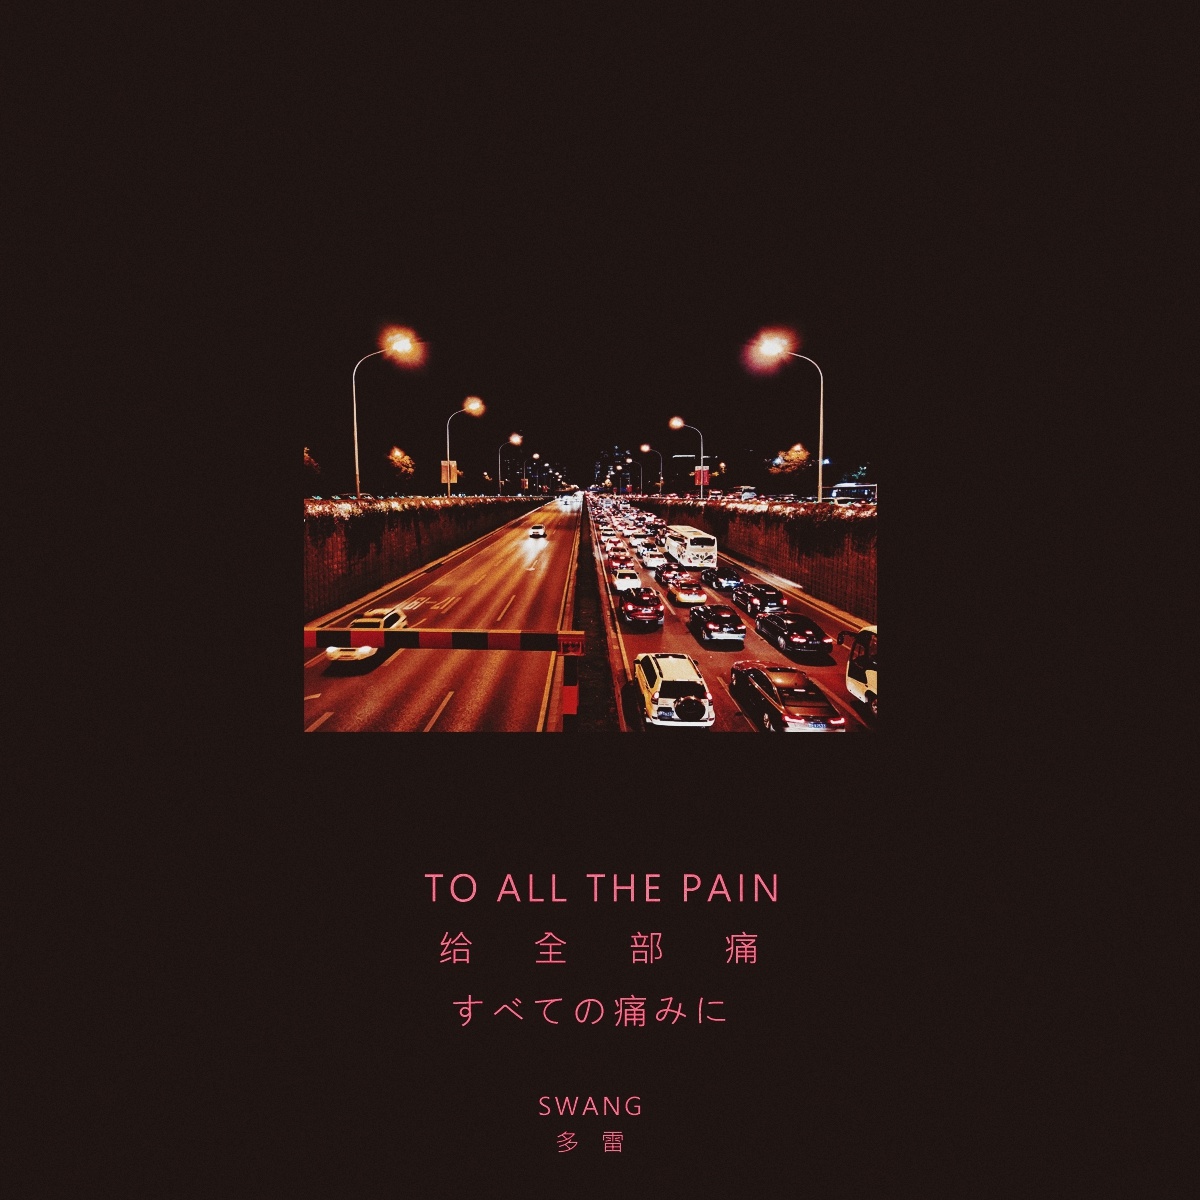 To all the pain